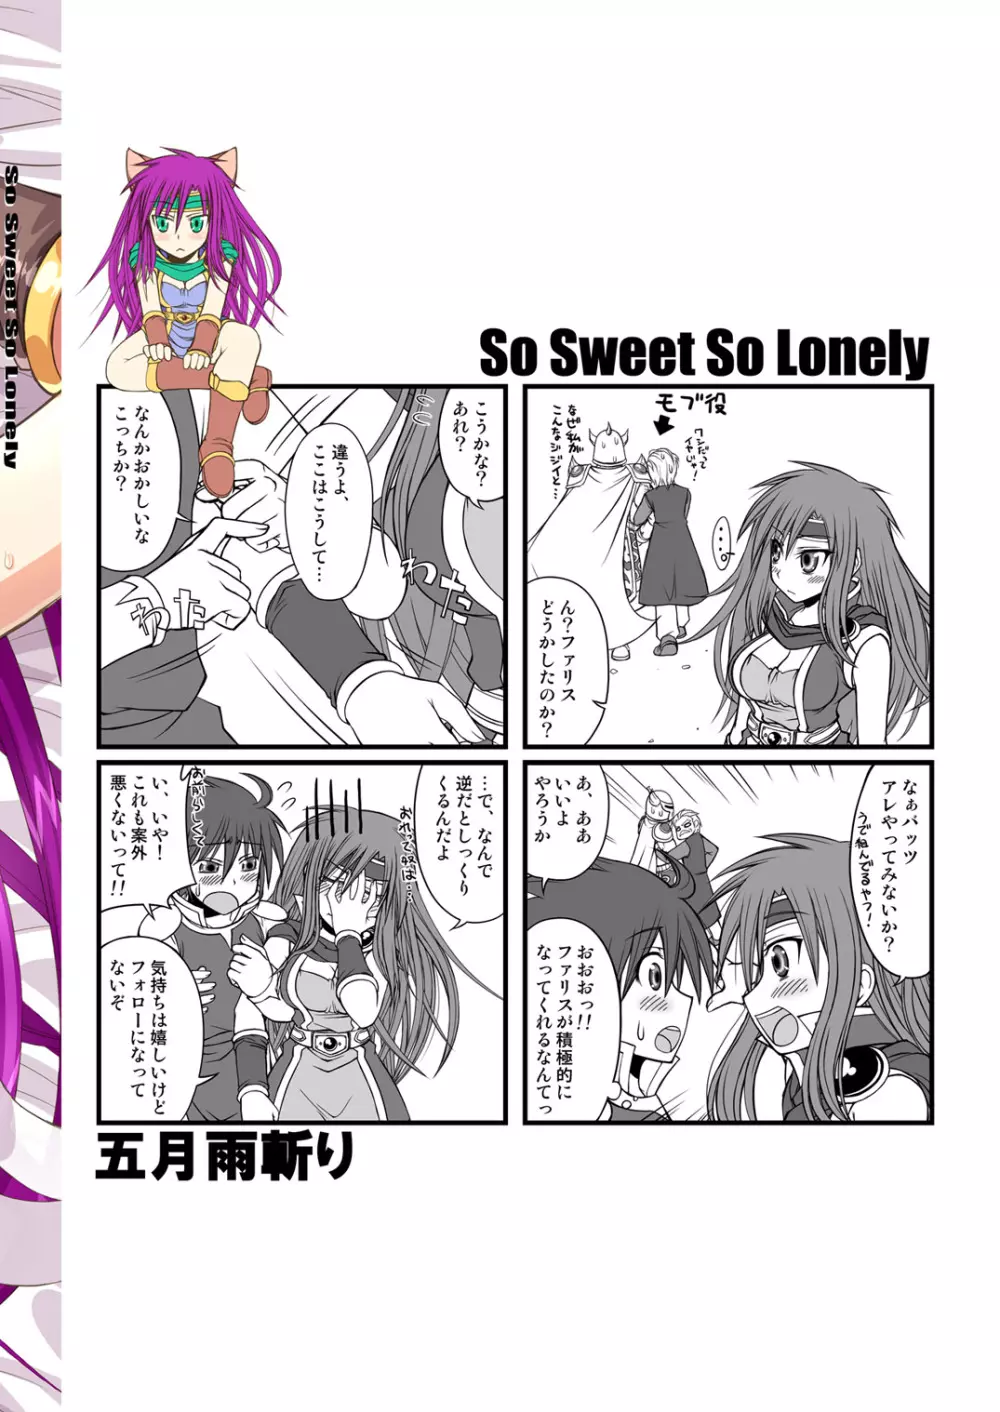 So Sweet So Lonely 31ページ